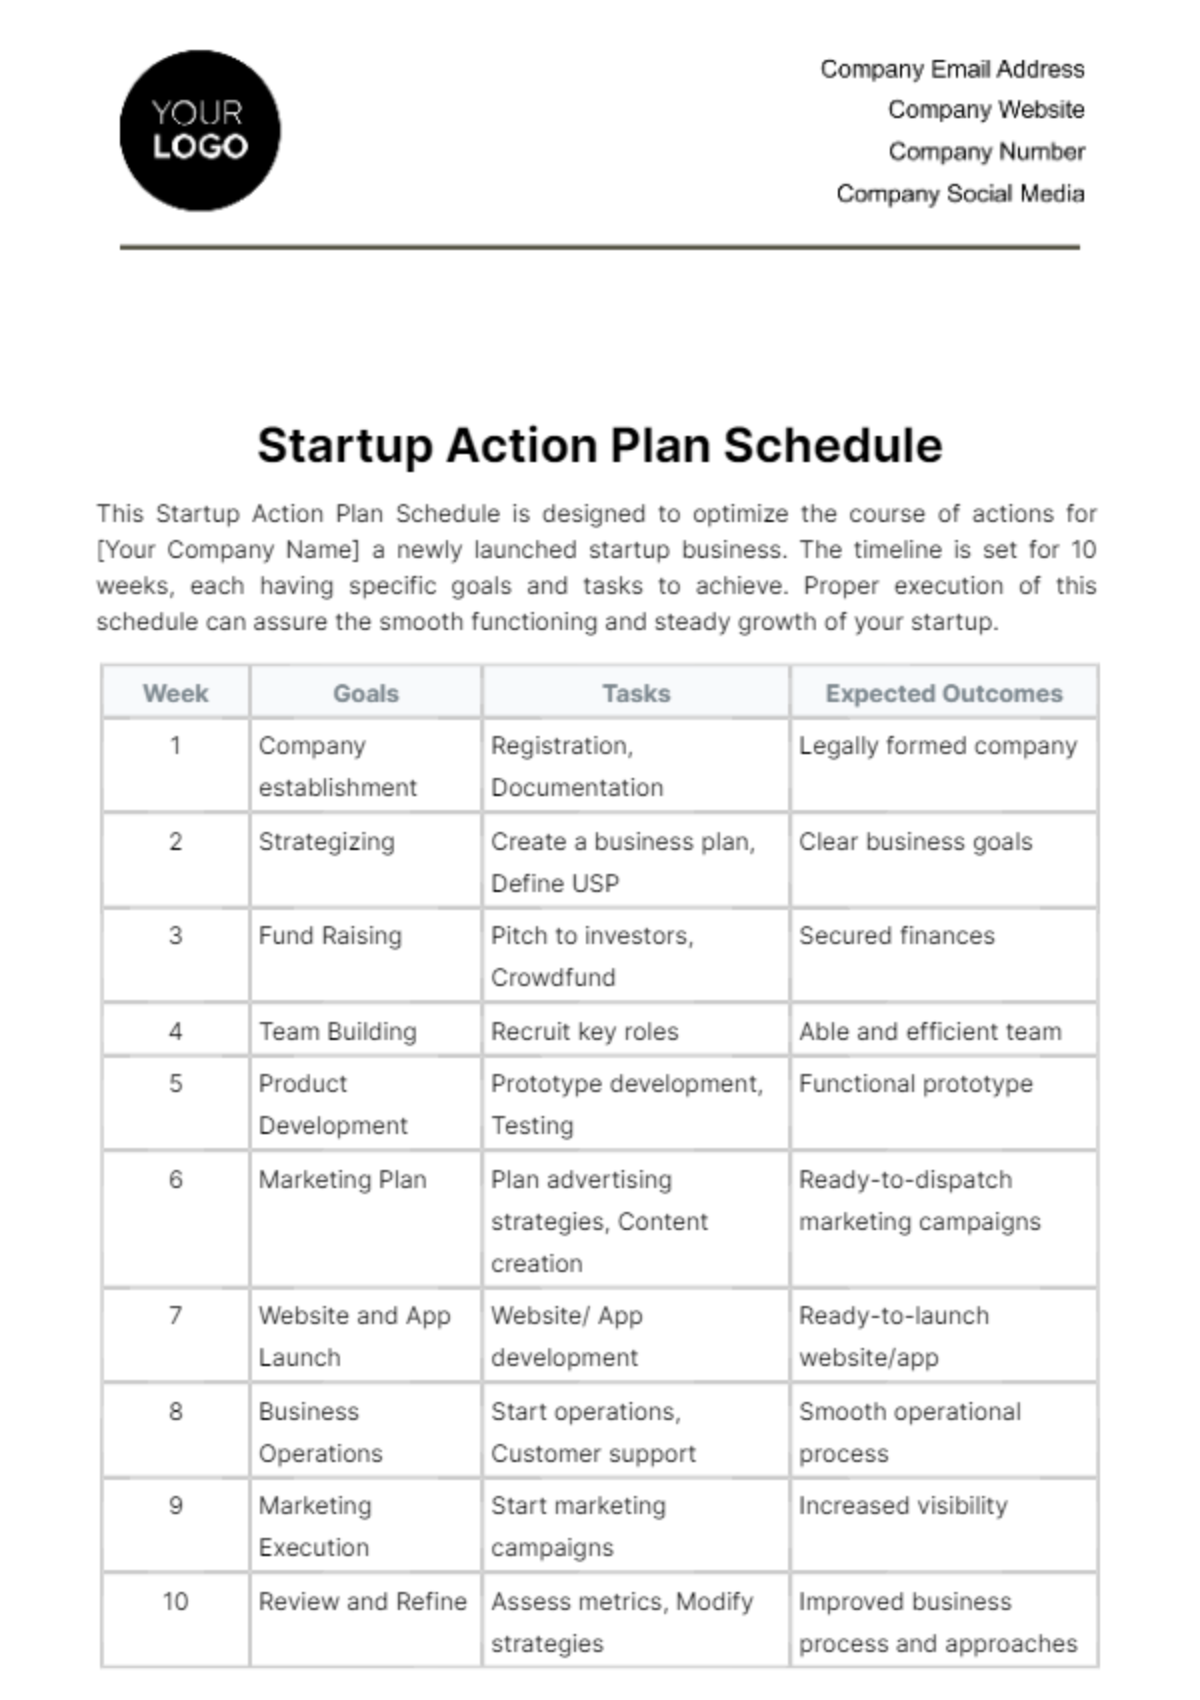 Free Startup Action Plan Schedule Template